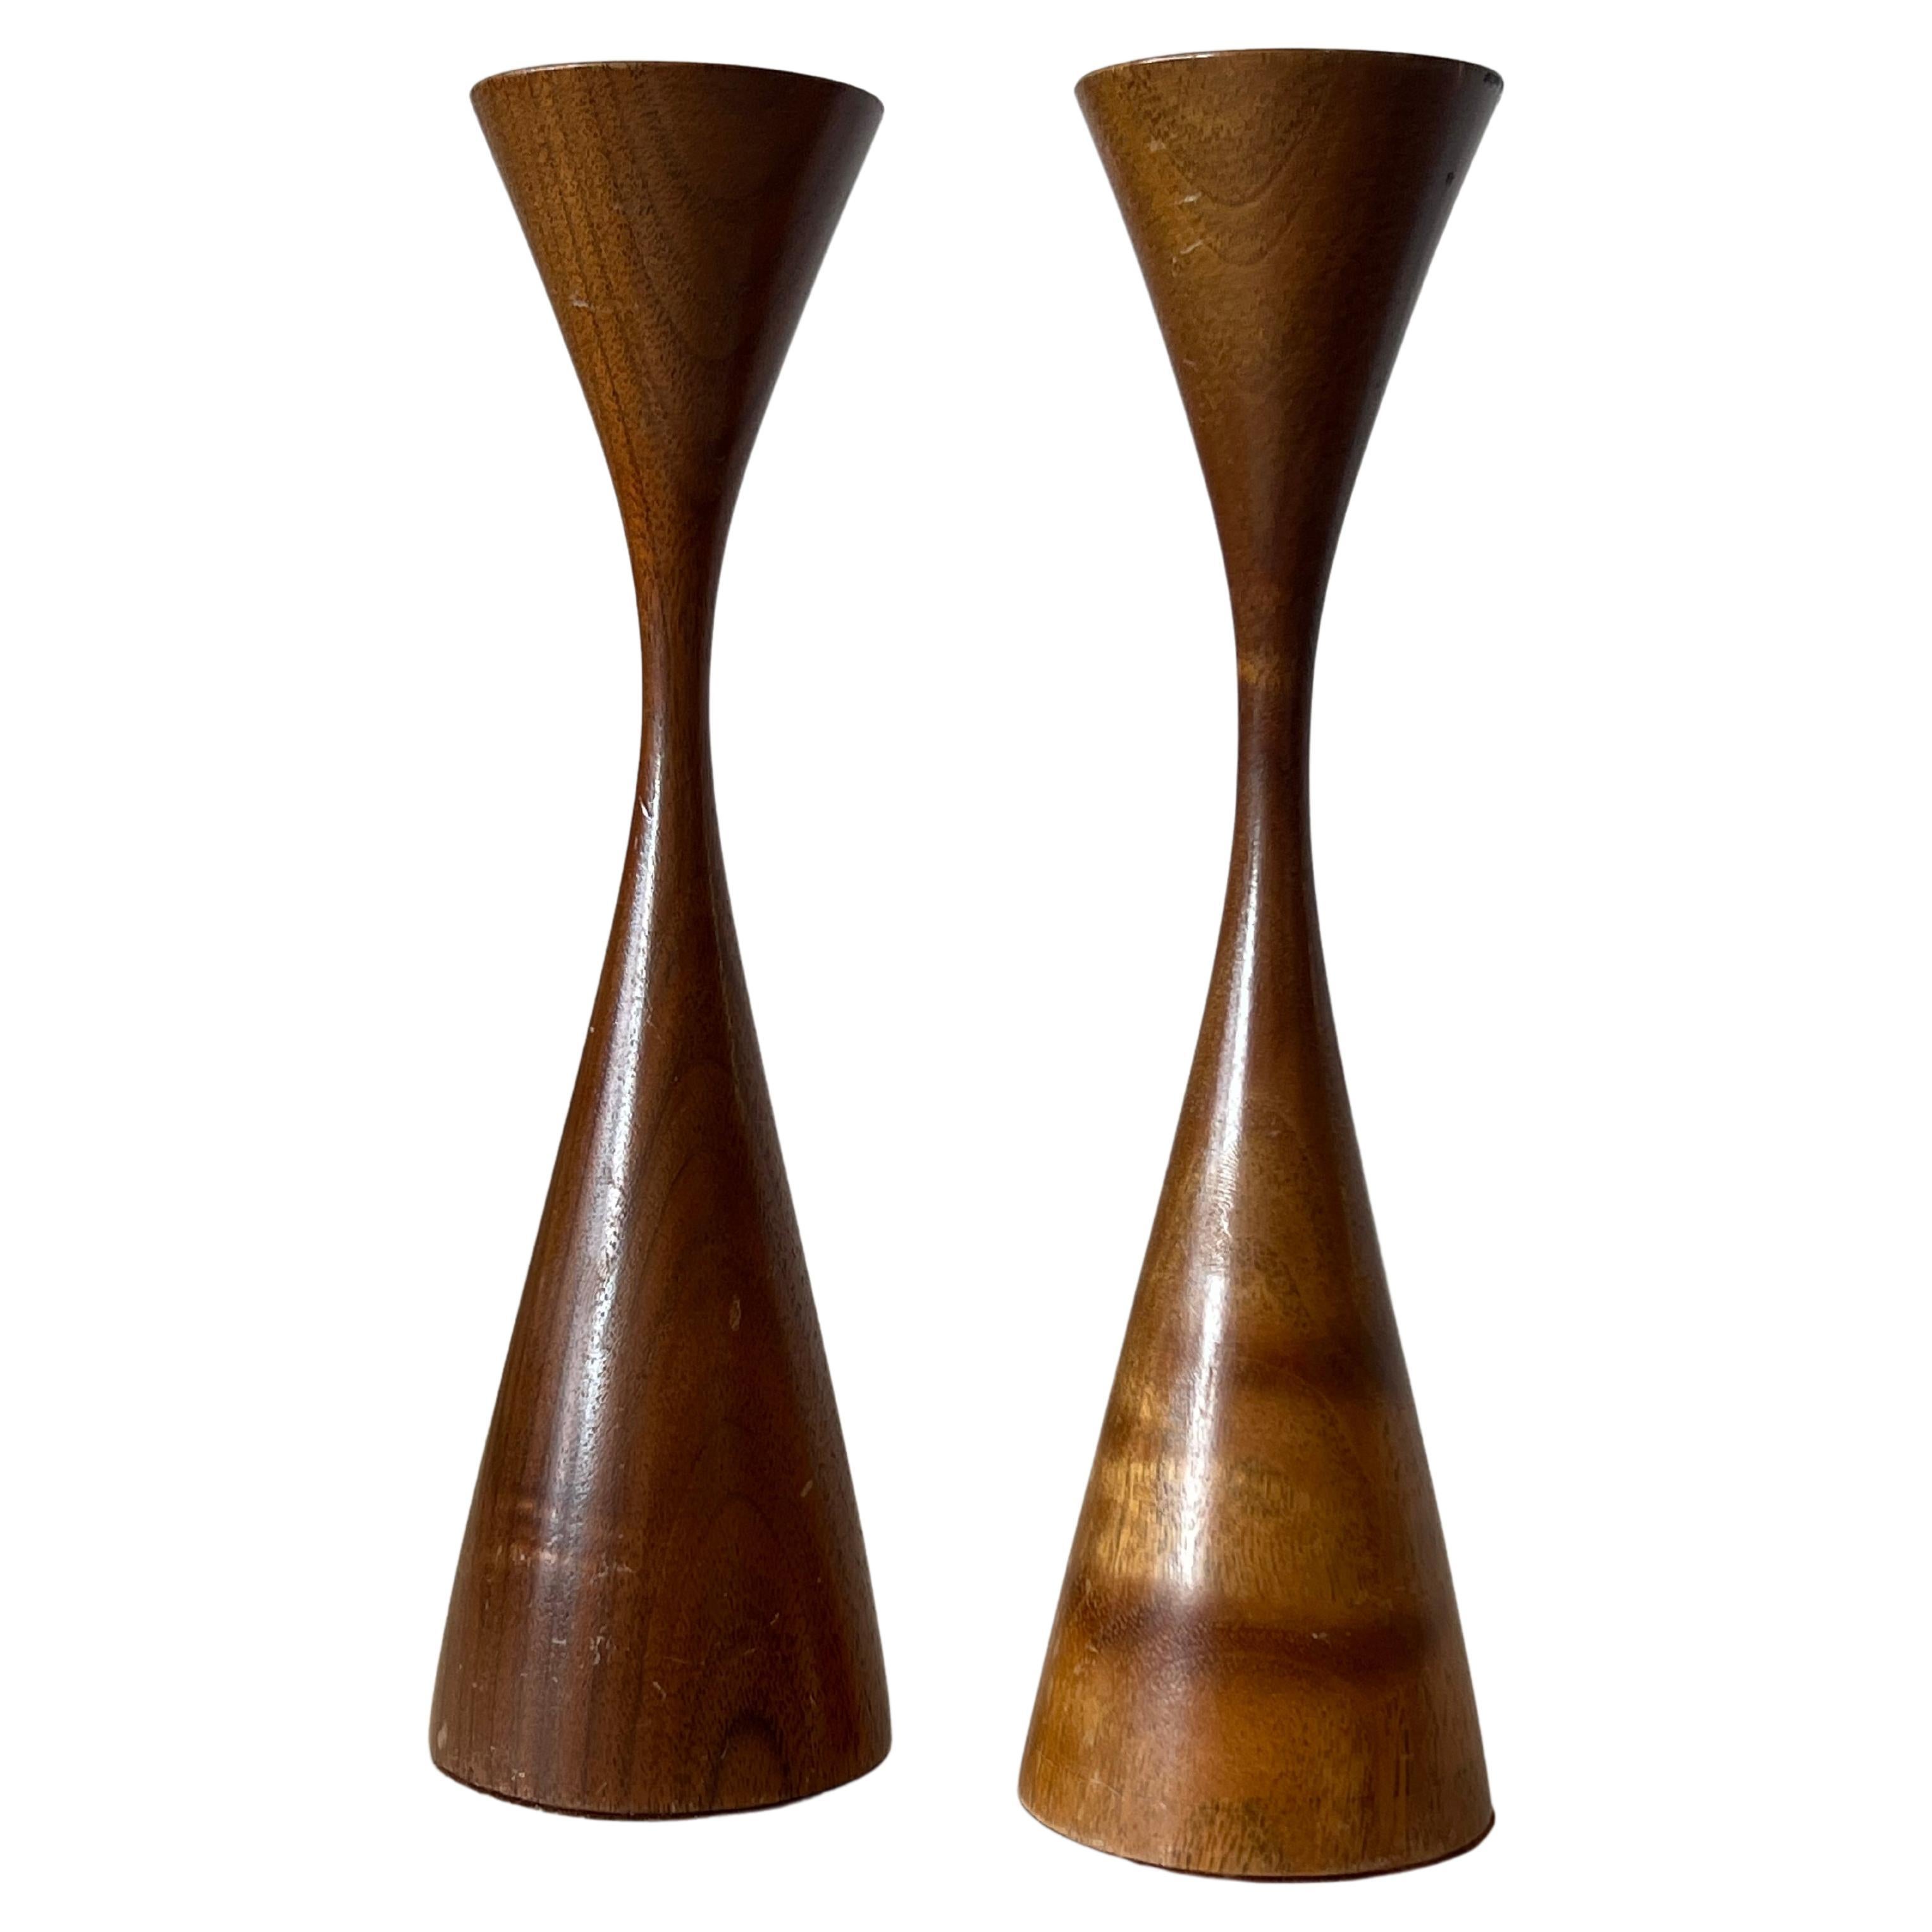 A Pair of Turned Walnut Candlesticks by Rude Osolnik 1970's